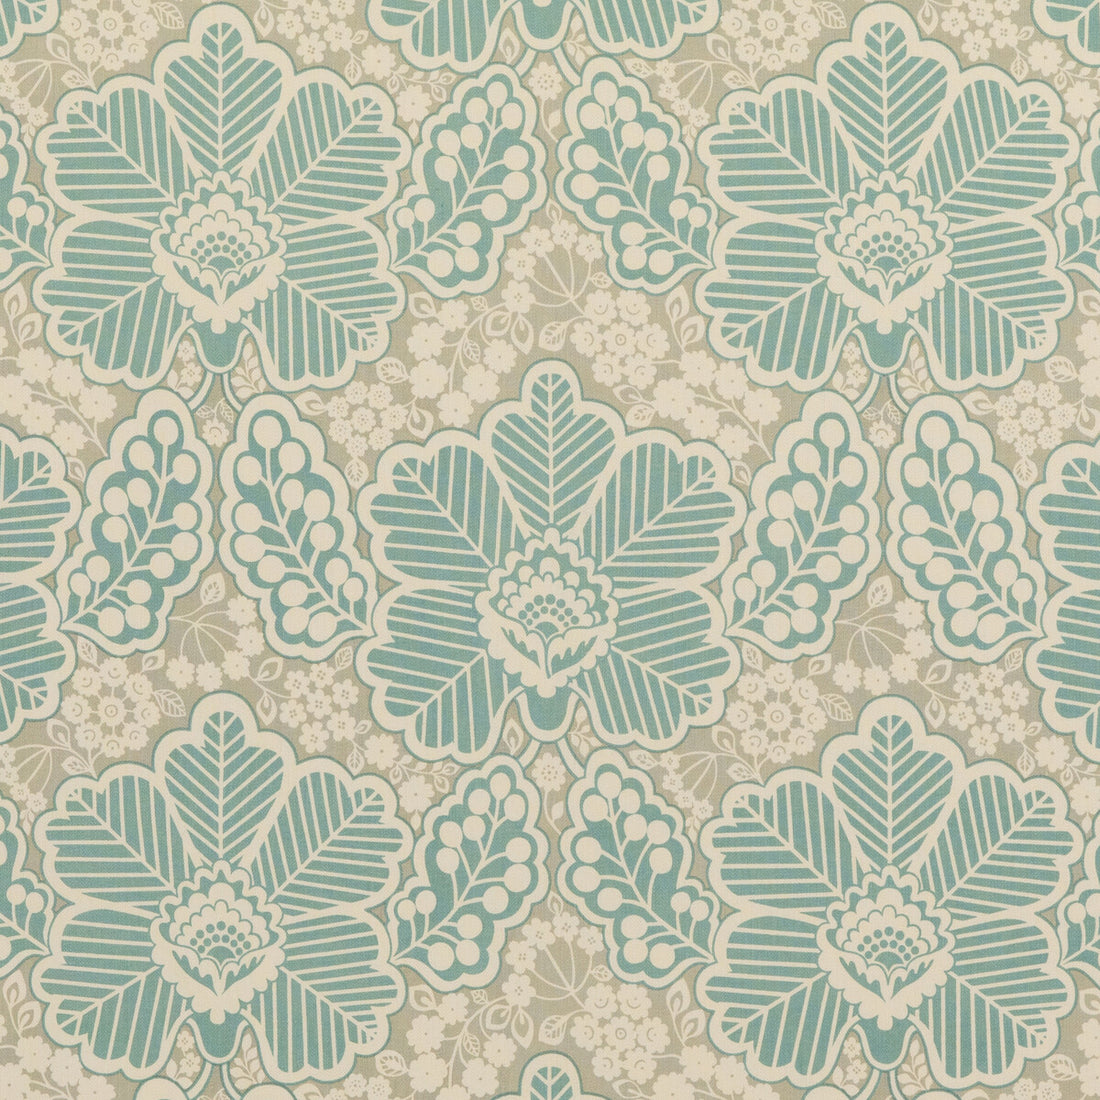 Arbour fabric in aqua color - pattern PP50479.3.0 - by Baker Lifestyle in the Block Party collection